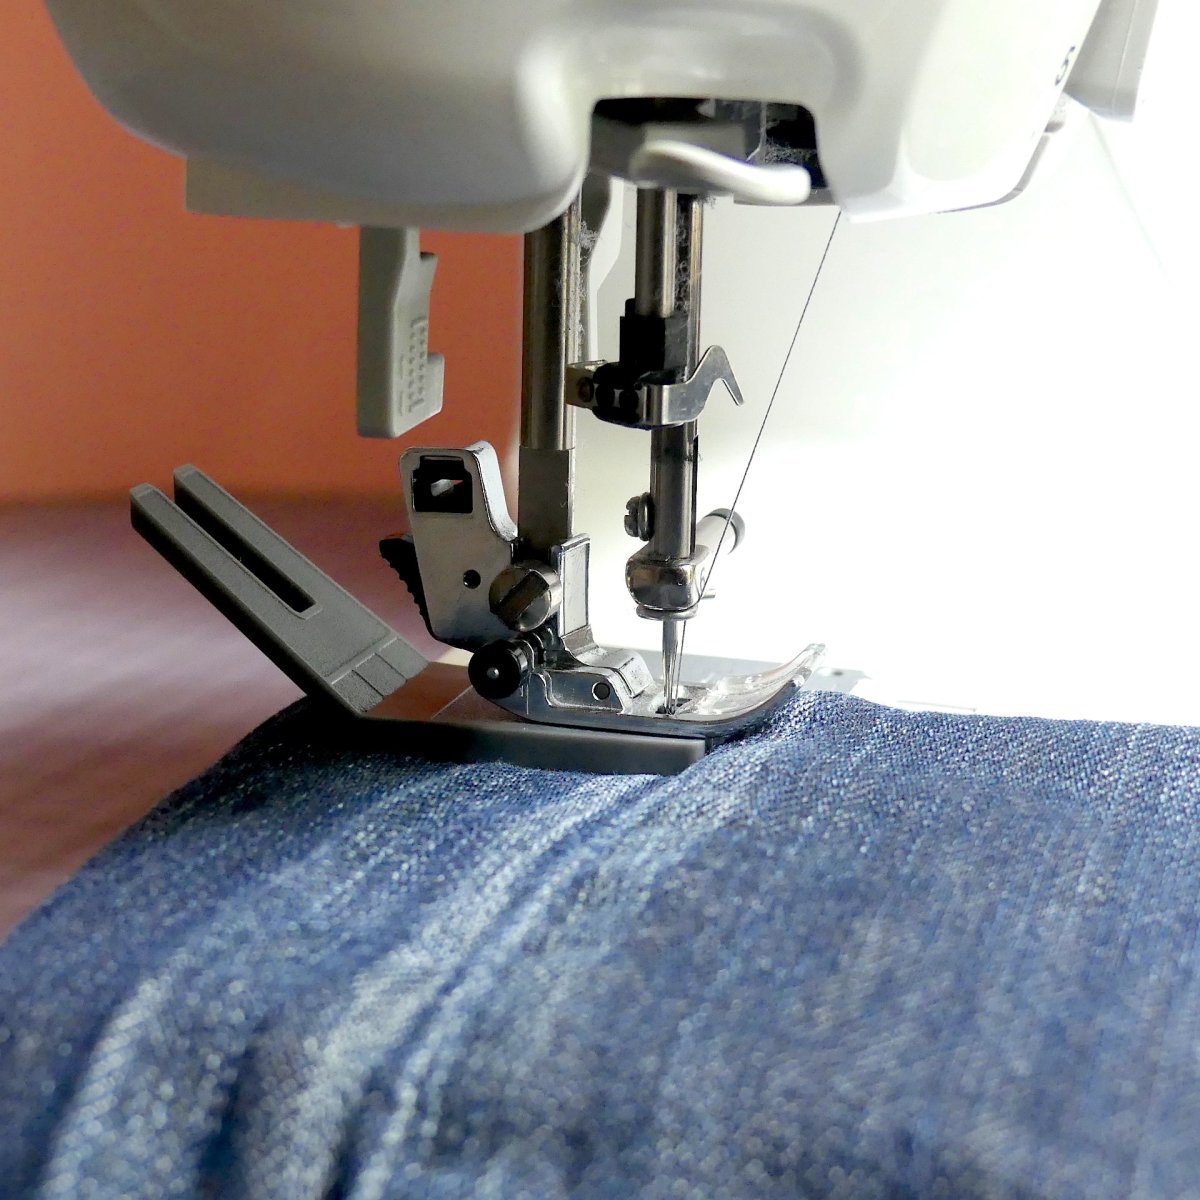 Bulky Seam Jumper going over a seam on jeans.